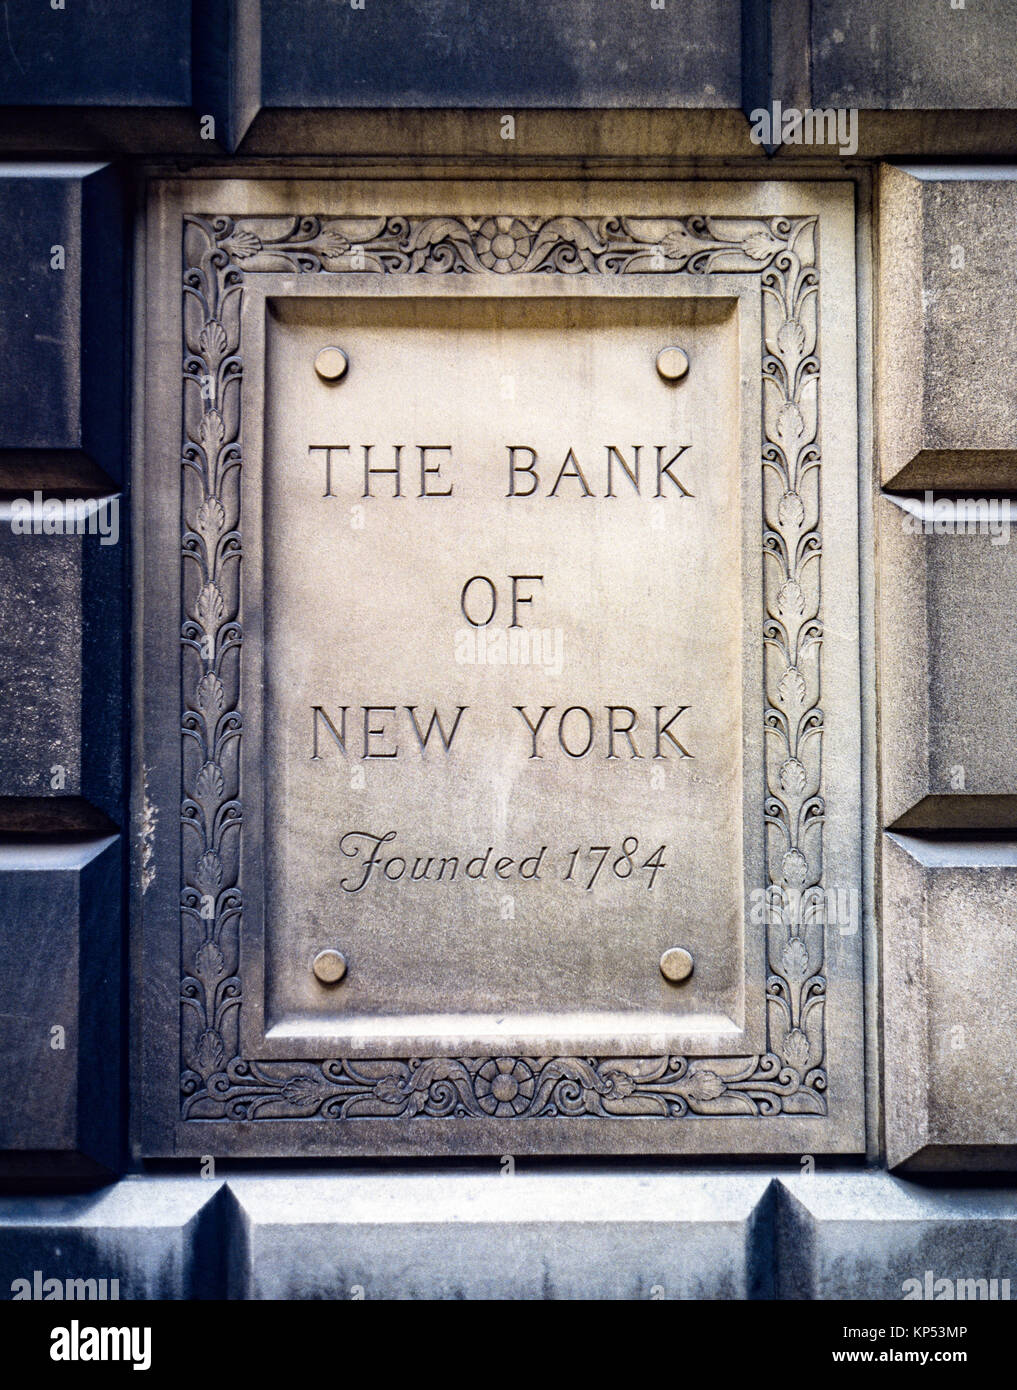 May 1982,New York,The Bank of New York sign,founded 1784,BNY Mellon, One Wall street,financial district,lower Manhattan,New york City,NY,NYC,USA, Stock Photo